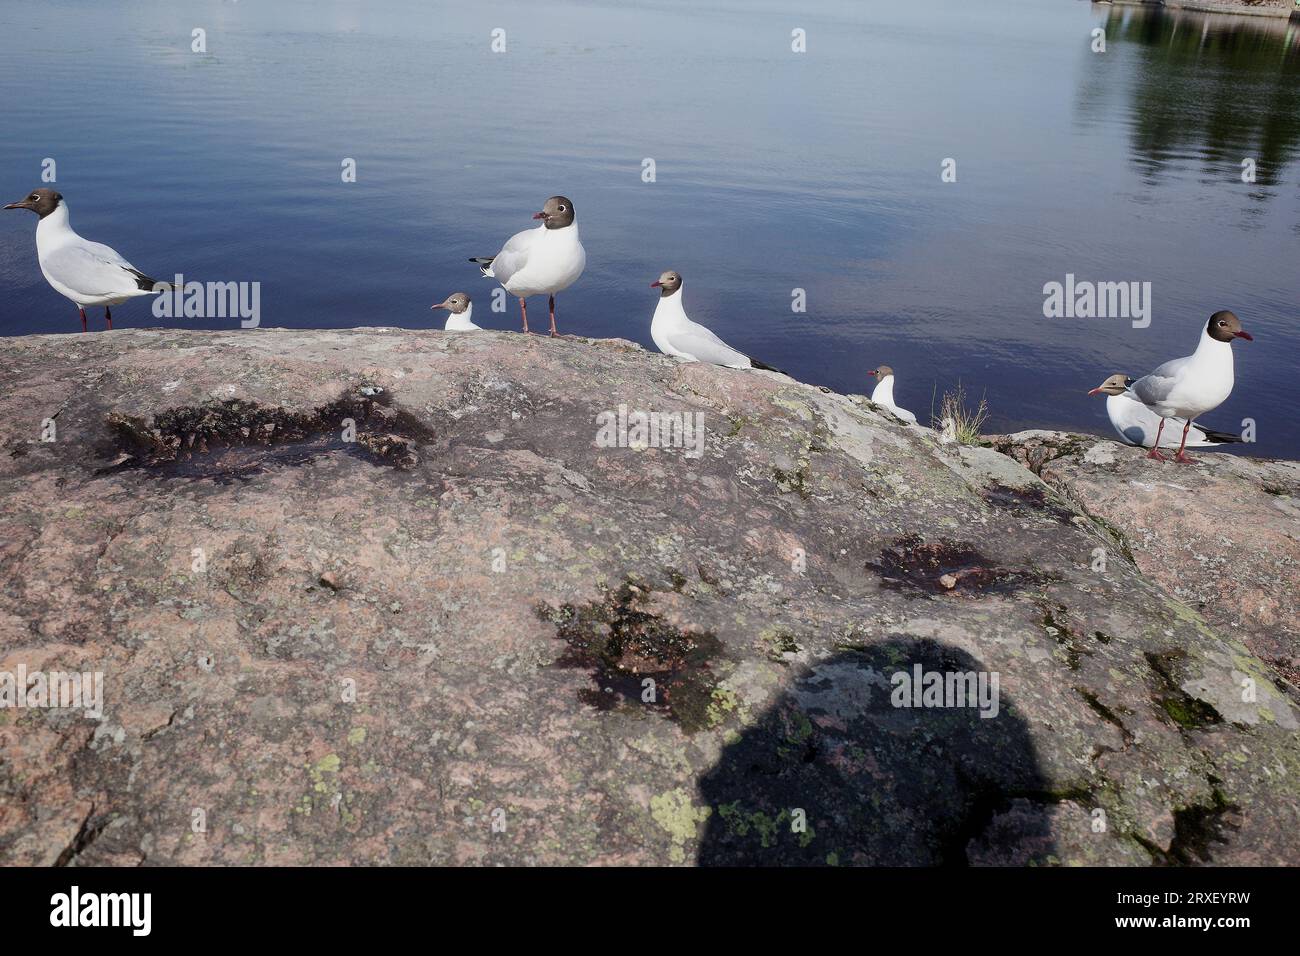 Seagulls on the rock. Peace and nature. Vyborg, Mon Repos Park Stock Photo